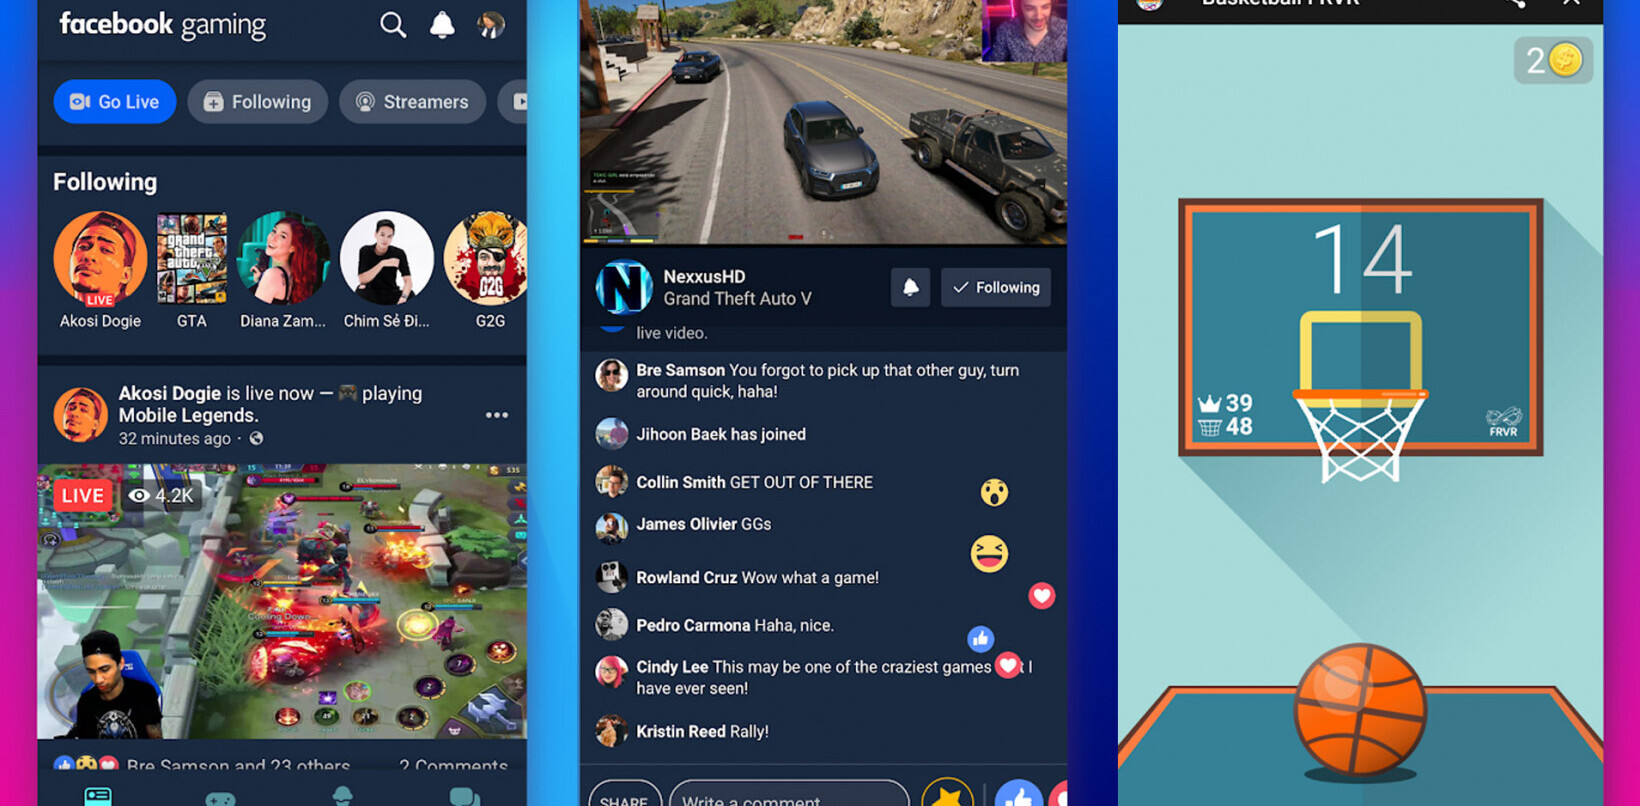 Facebook launches gaming app in the US to take on Twitch and YouTube